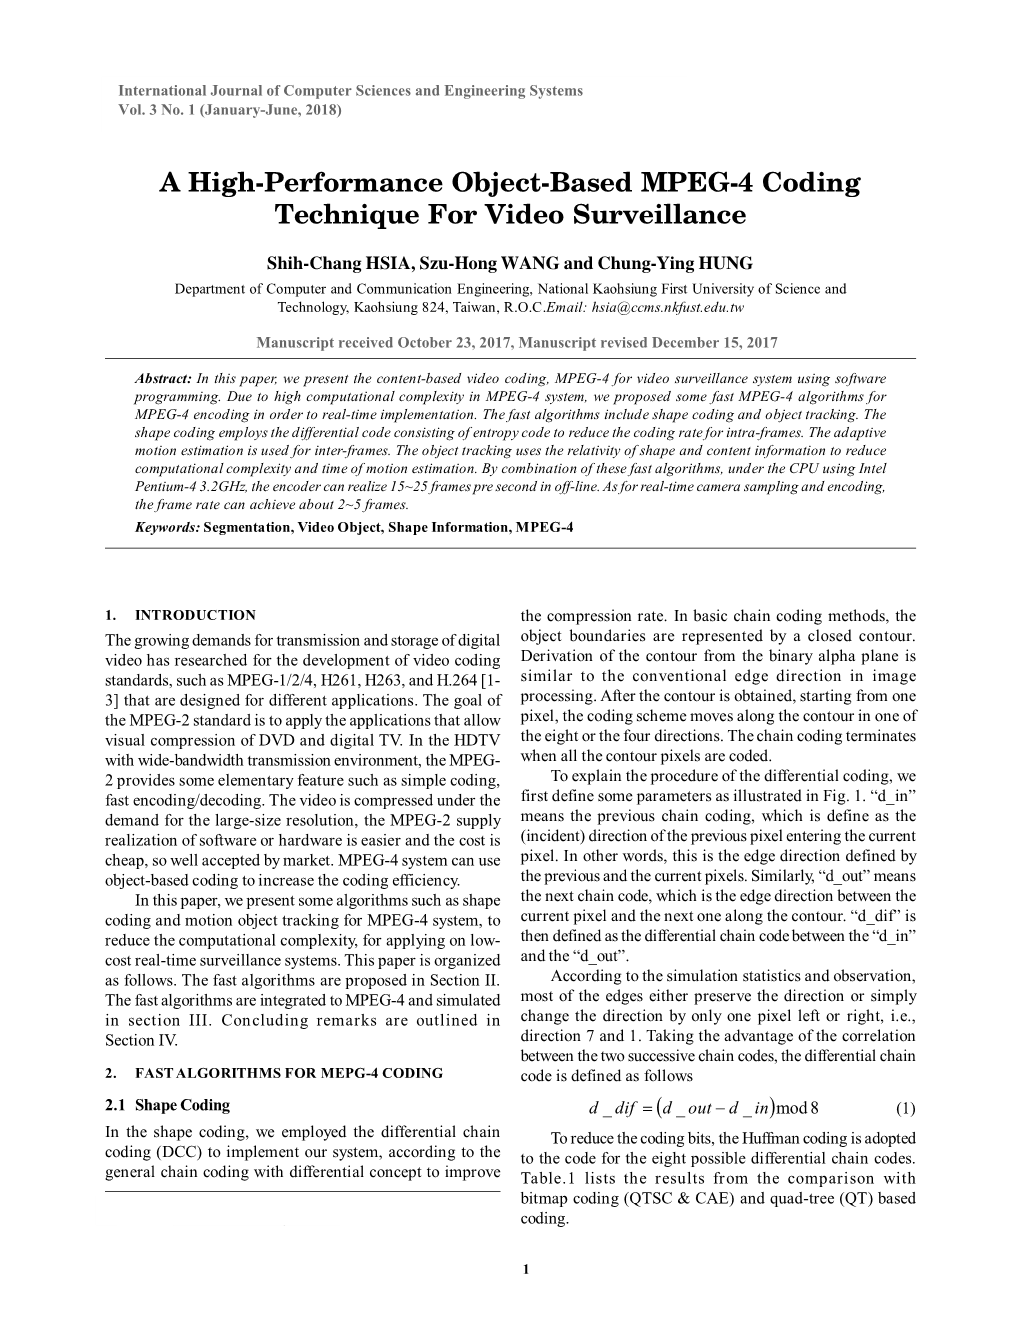 A High-Performance Object-Based MPEG-4 Coding Technique for Video Surveillance